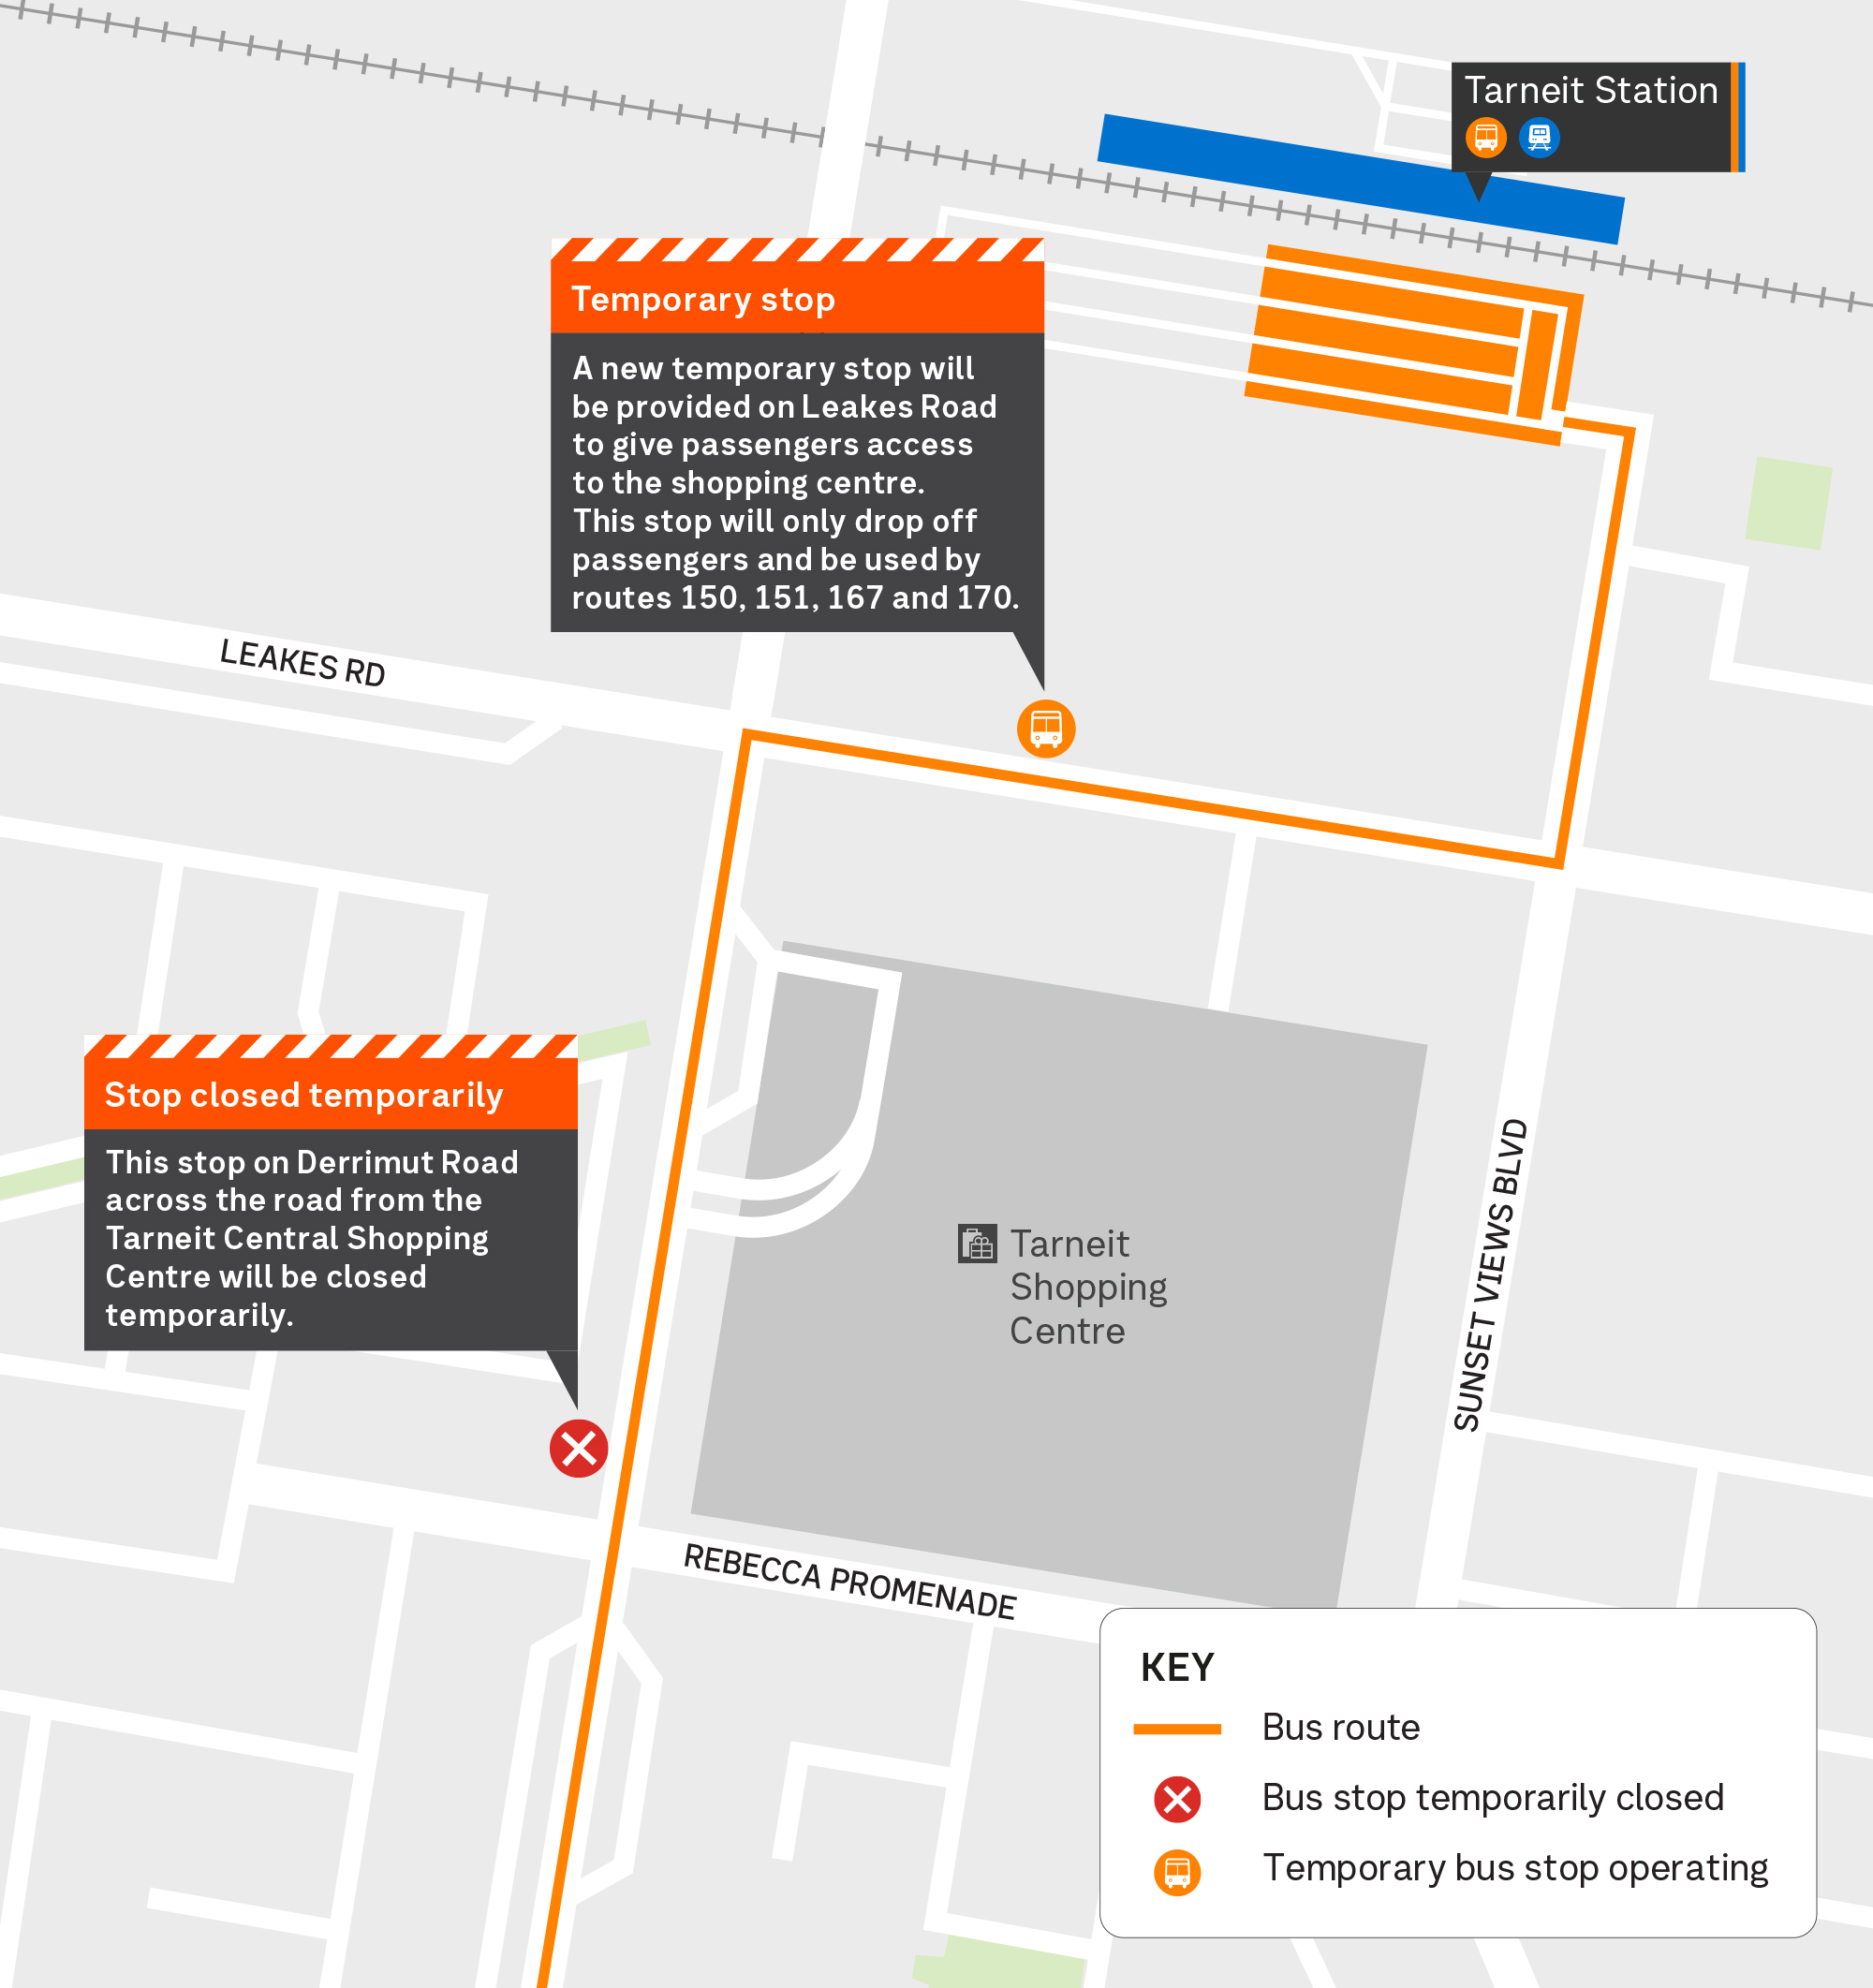 Map of temporary bus stop closures and temporary stops at the south side of Tarneit Station.